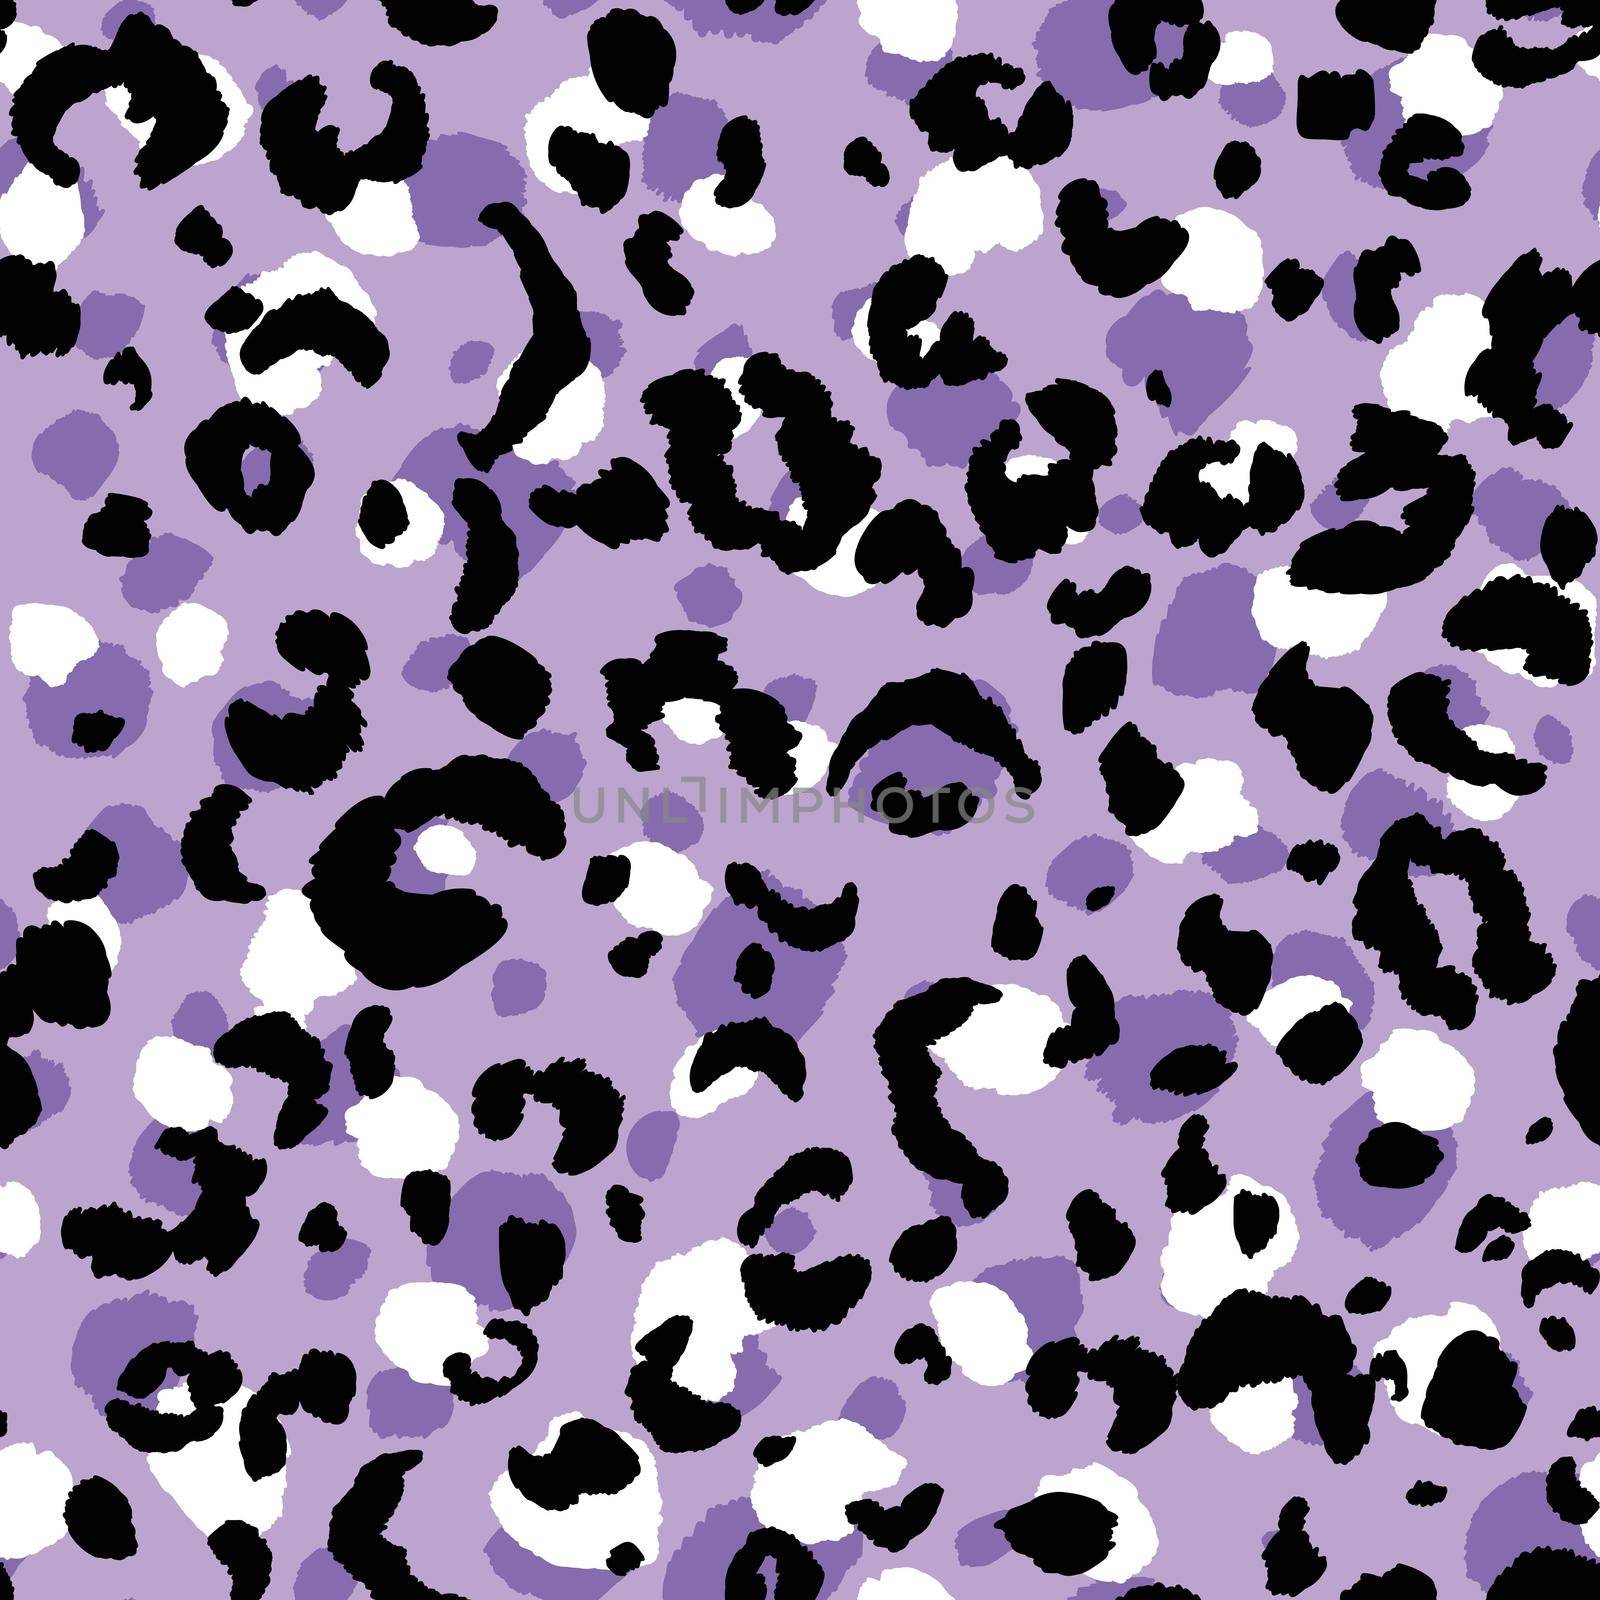 Abstract modern leopard seamless pattern. Animals trendy background. Violet and black decorative vector stock illustration for print, card, postcard, fabric, textile. Modern ornament of stylized skin by allaku